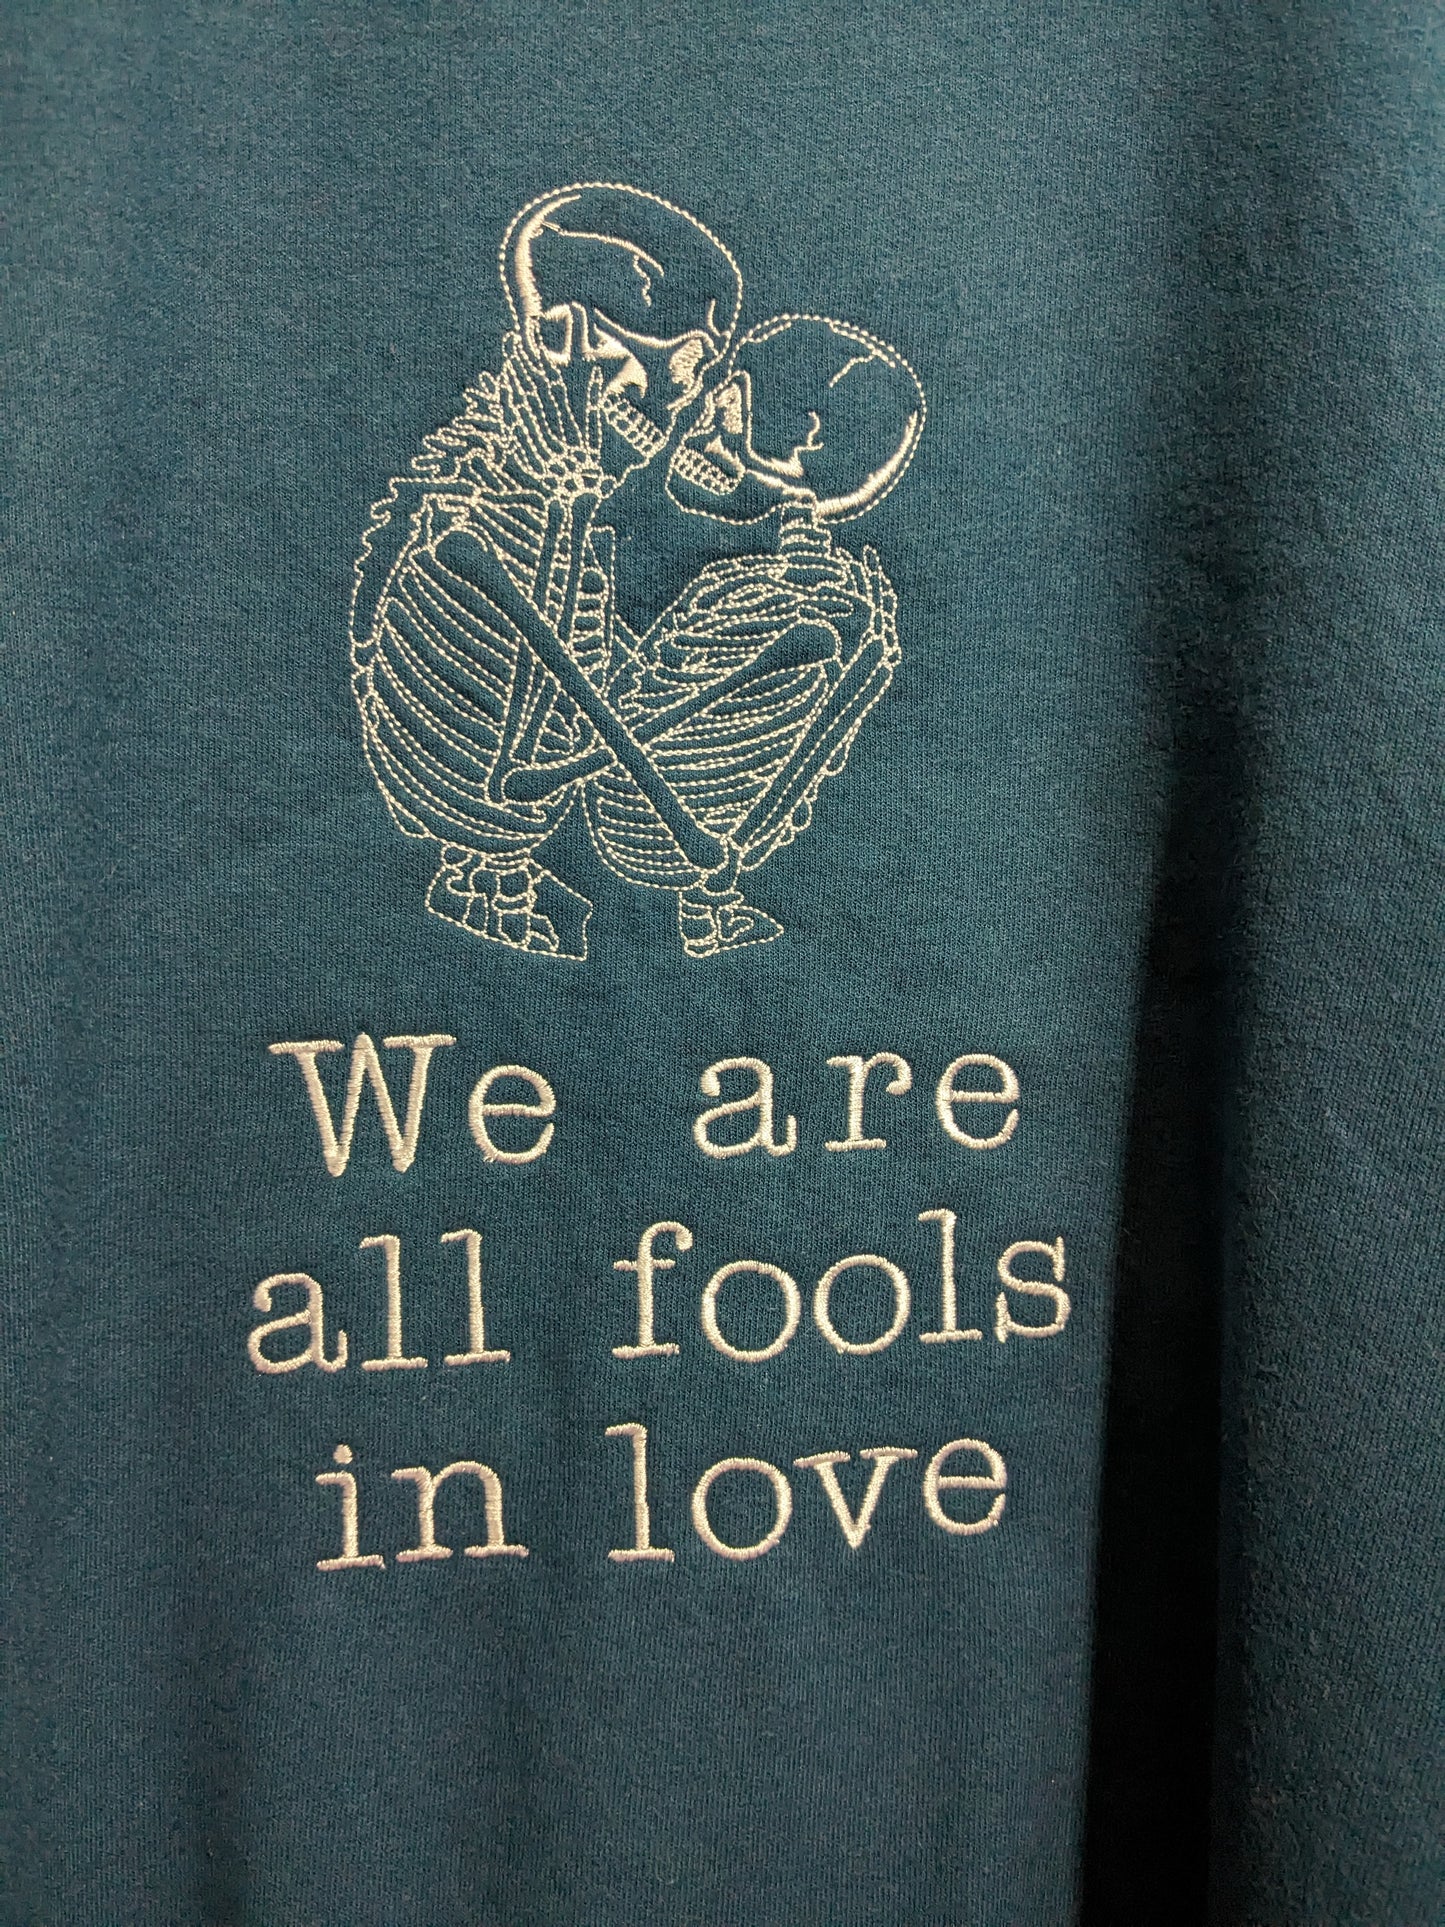 Size XL Navy Blue Reclaimed Sweatshirt - Embroidered Pride and Prejudice - Jane Austen Quote and Gothic Skeleton Illustration